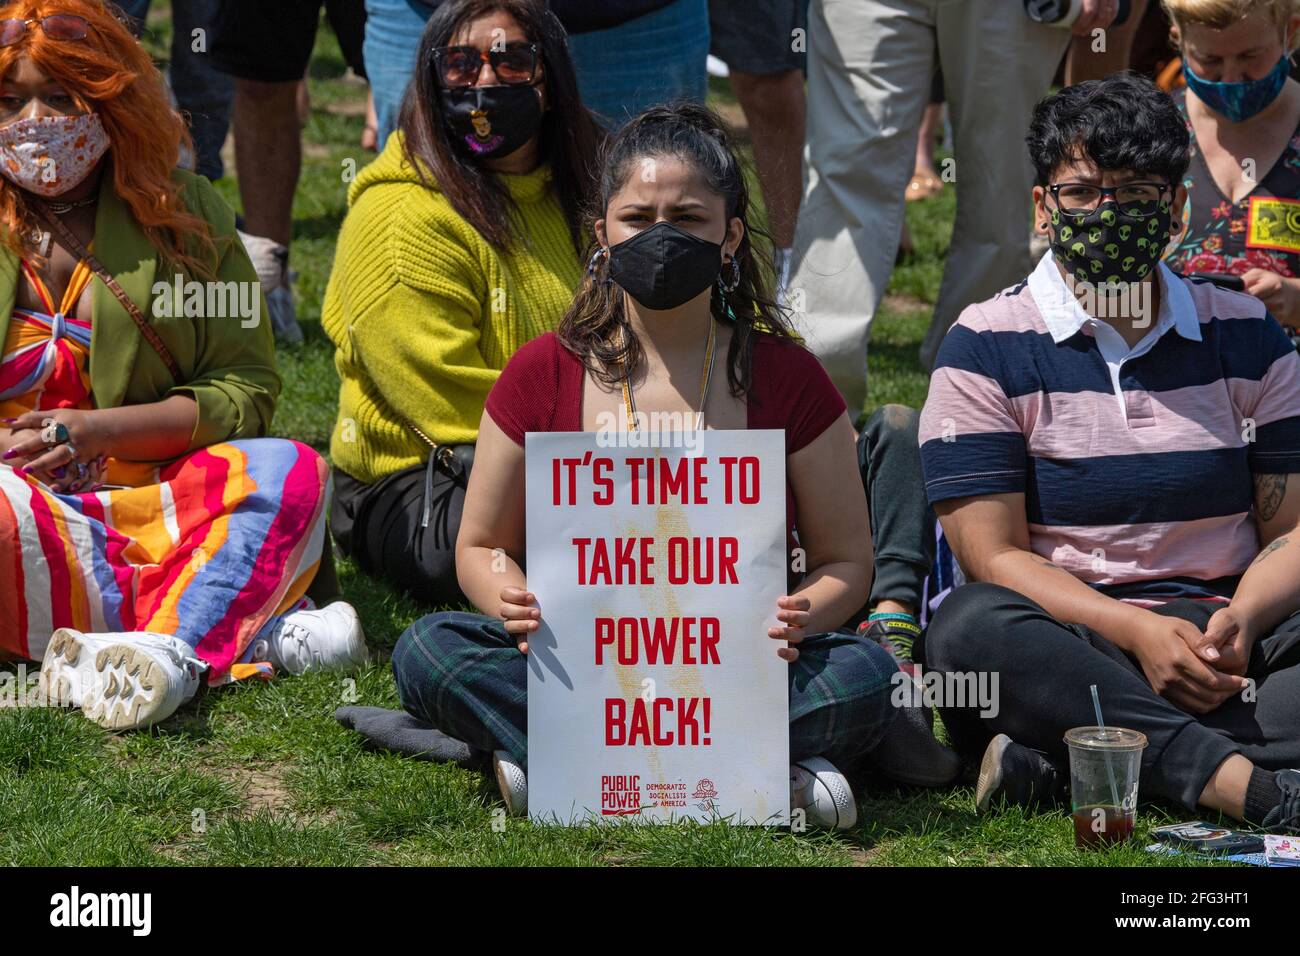 NEW YORK, NY - APRIL 24: A woman holds a sign that reads 'it's time to take our power back!' seen during an Earth Day Celebration in Astoria Park on April 24, 2021 in the Astoria neighborhood of the Queens borough of New York City.   Congresswoman Ocasio-Cortez joined by New York State Senator Jessica Ramos and New York Assembly Member Zohran Mamdani for remarks about the NRG Energy, Inc proposal for the Astoria power plant. Credit: Ron Adar/Alamy Live News Stock Photo